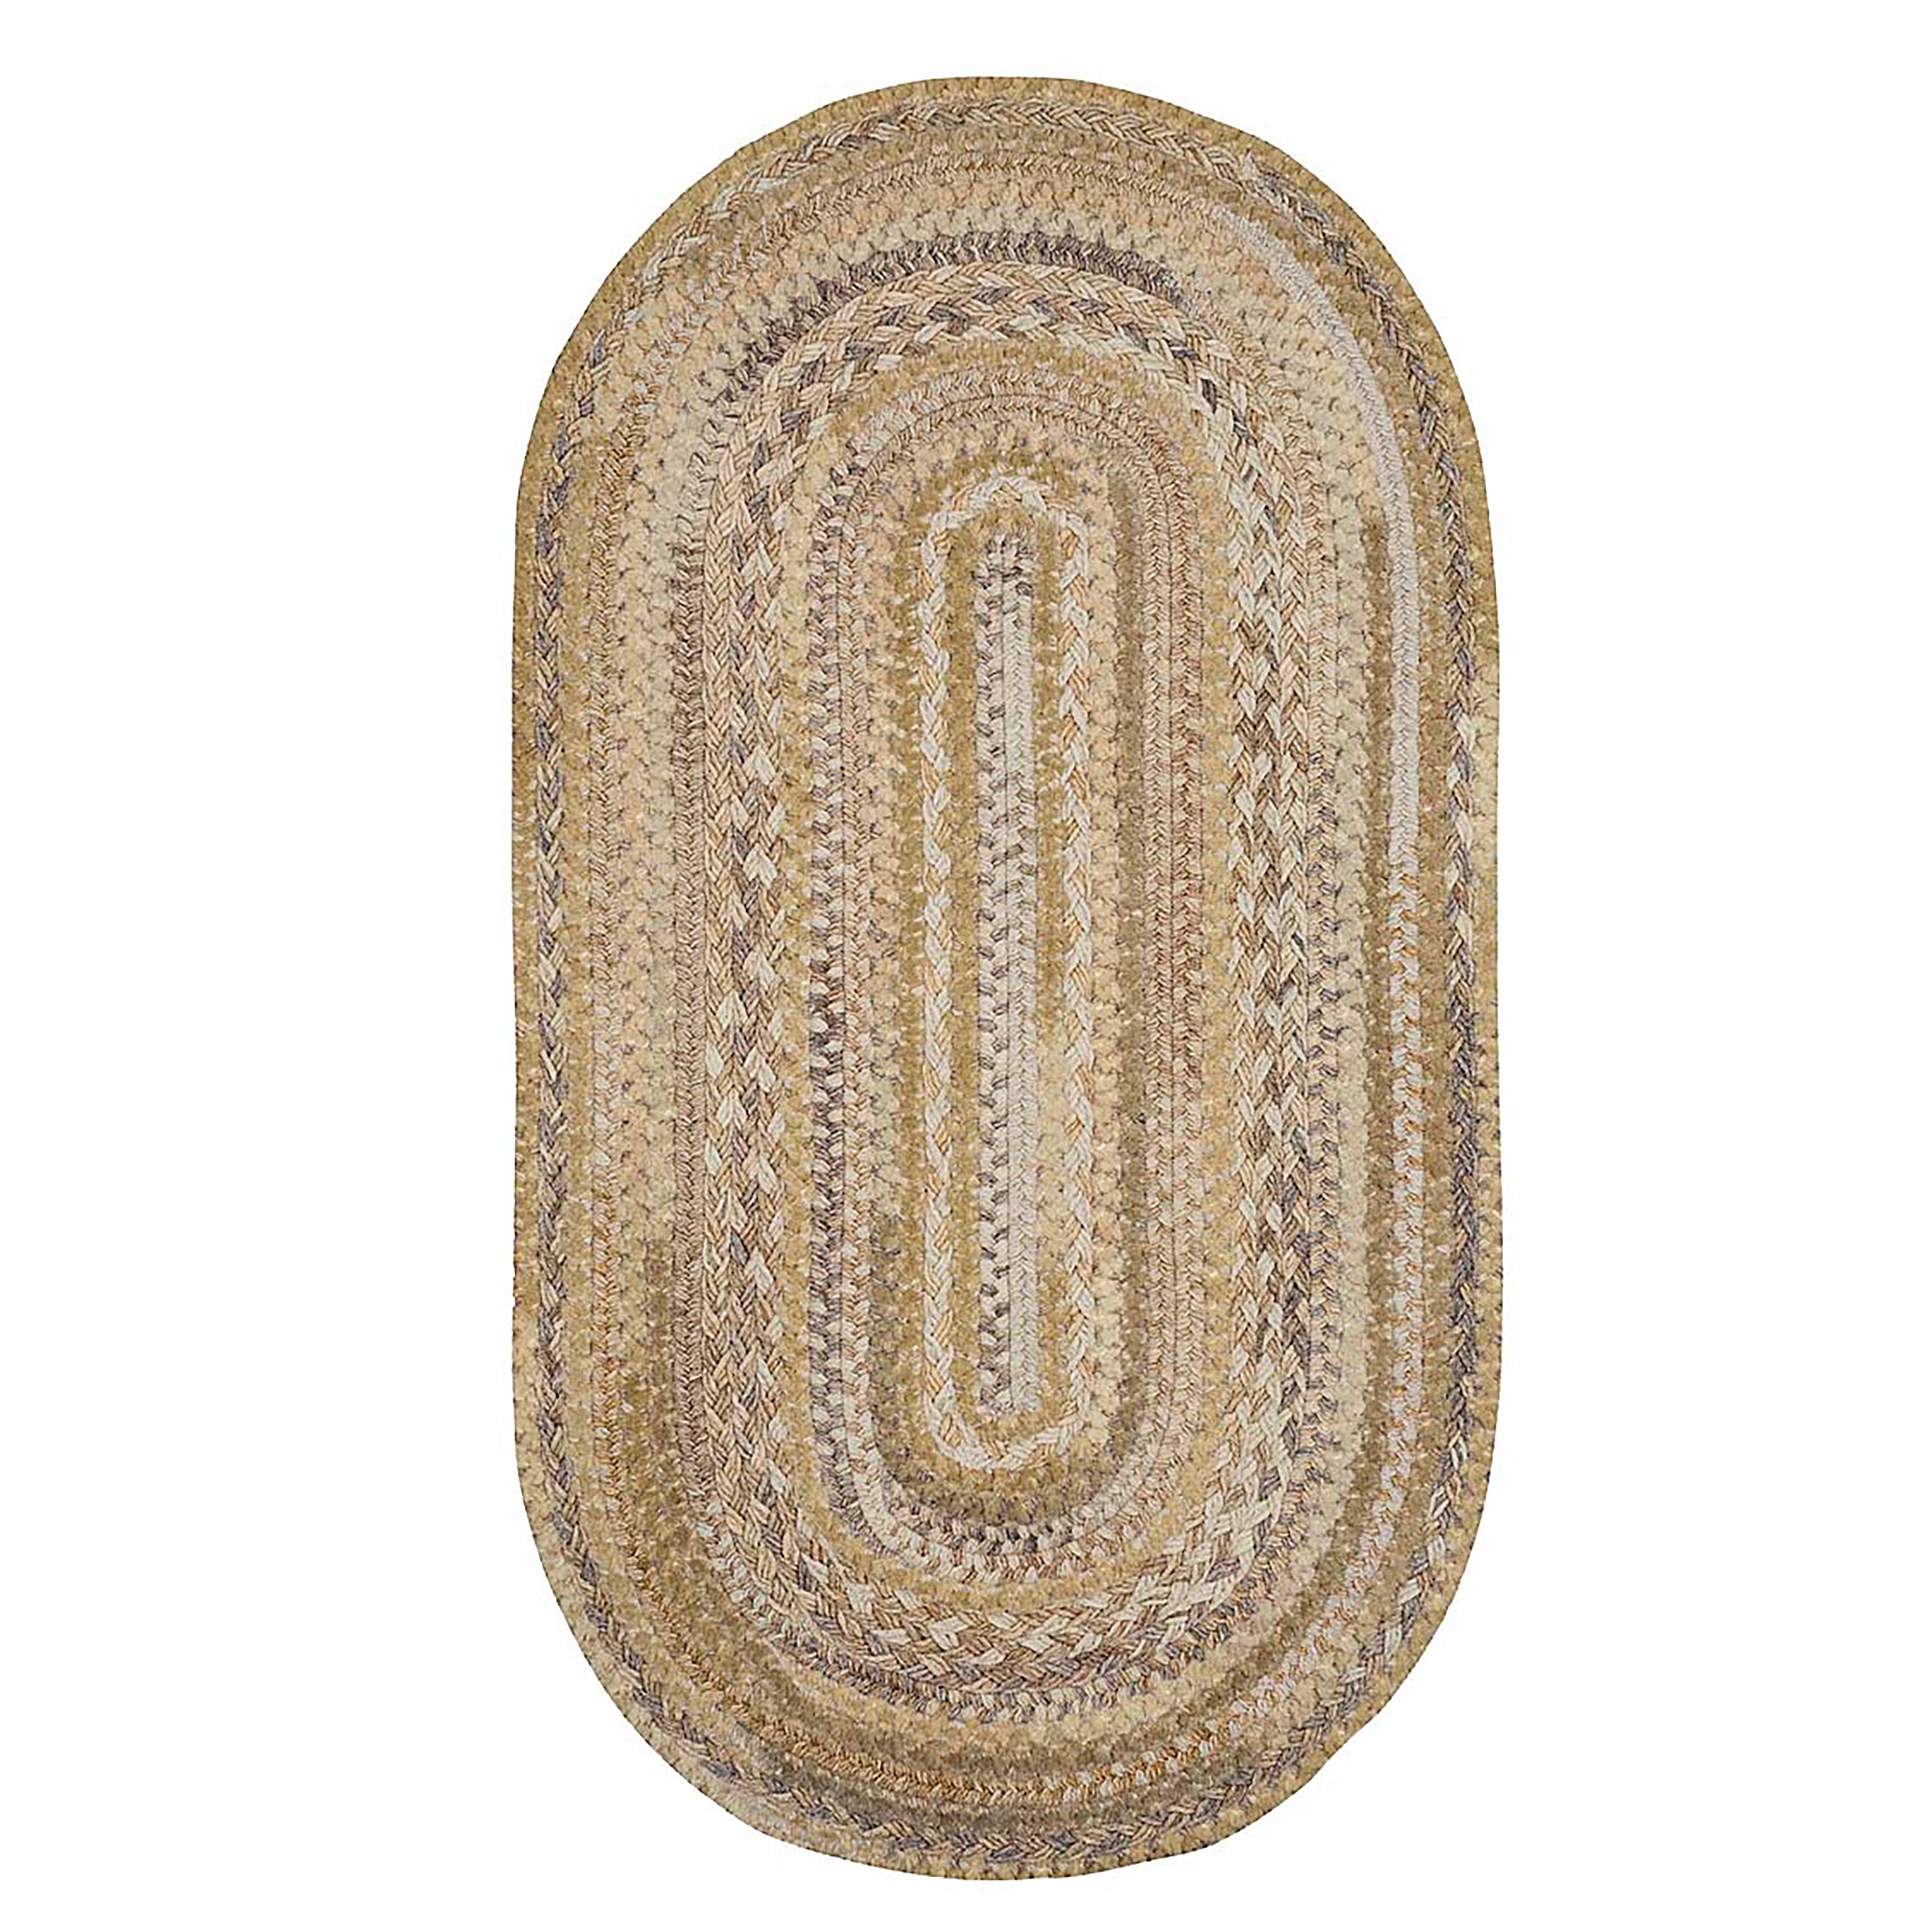 Image of Oval Riverview Wool Blend Braided Rug, 3' x 5'